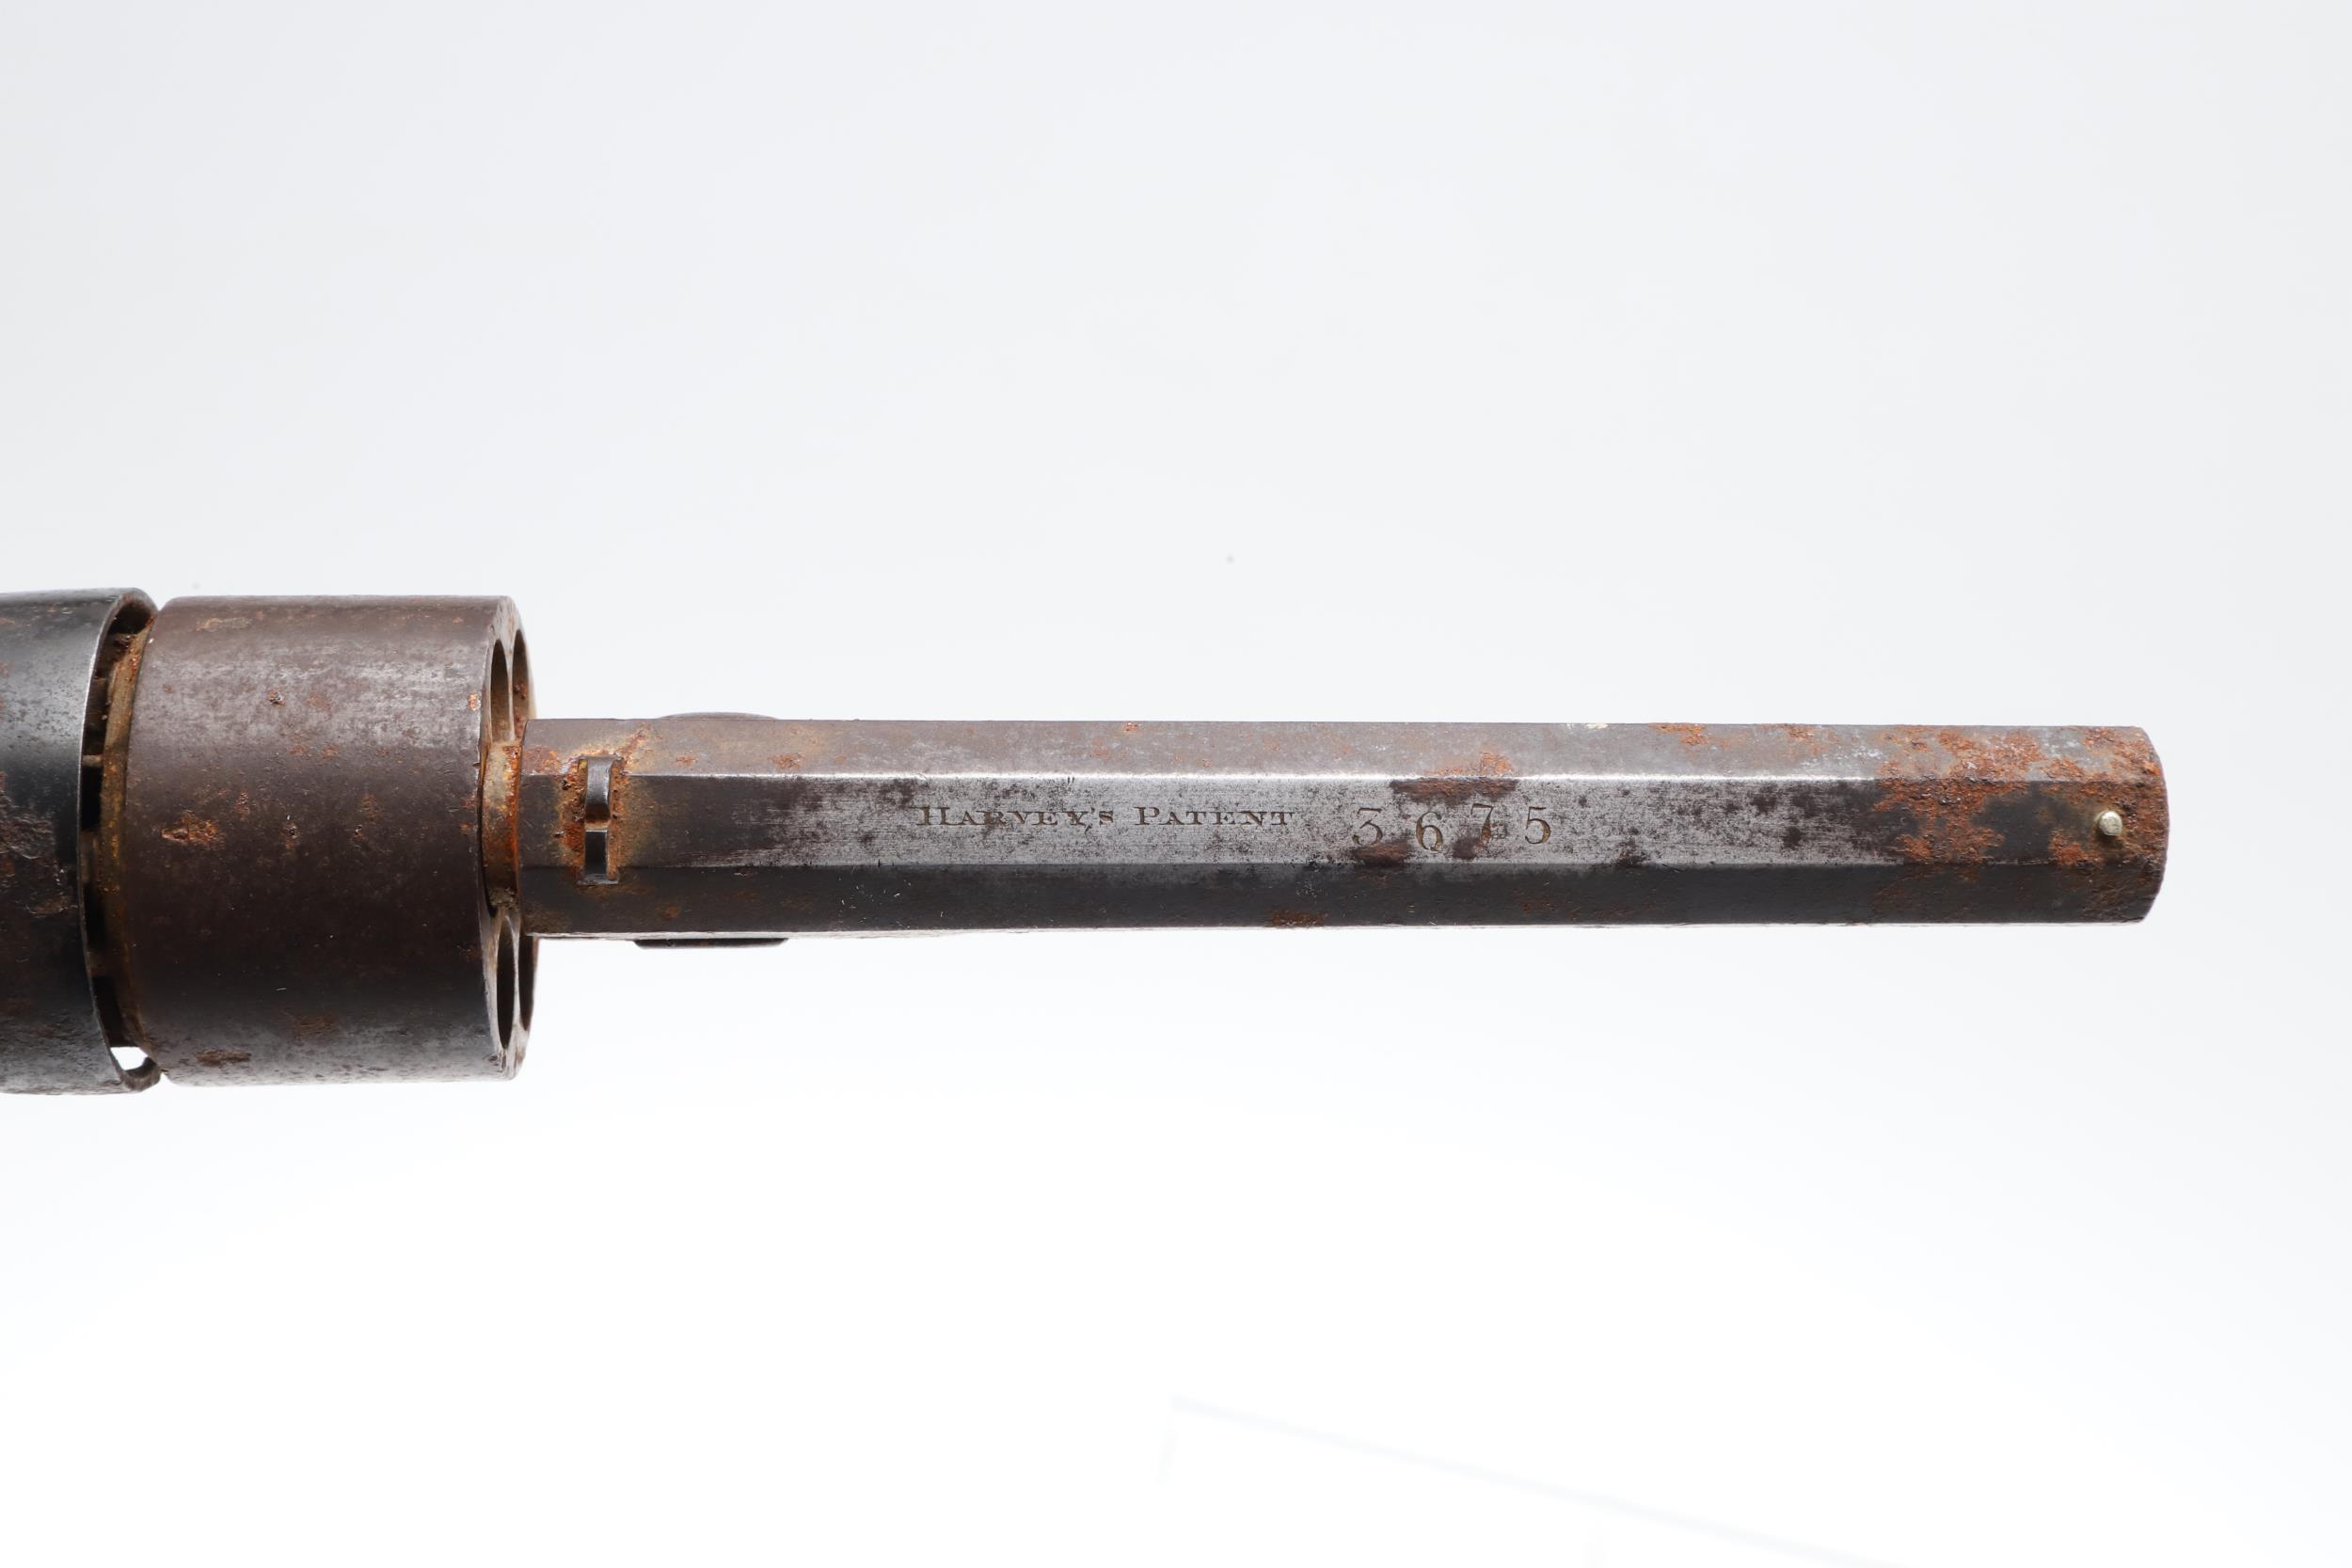 A HARVEY'S PATENT PERCUSSION REVOLVER, FIRST MODEL, NUMBER 3675. - Image 10 of 11